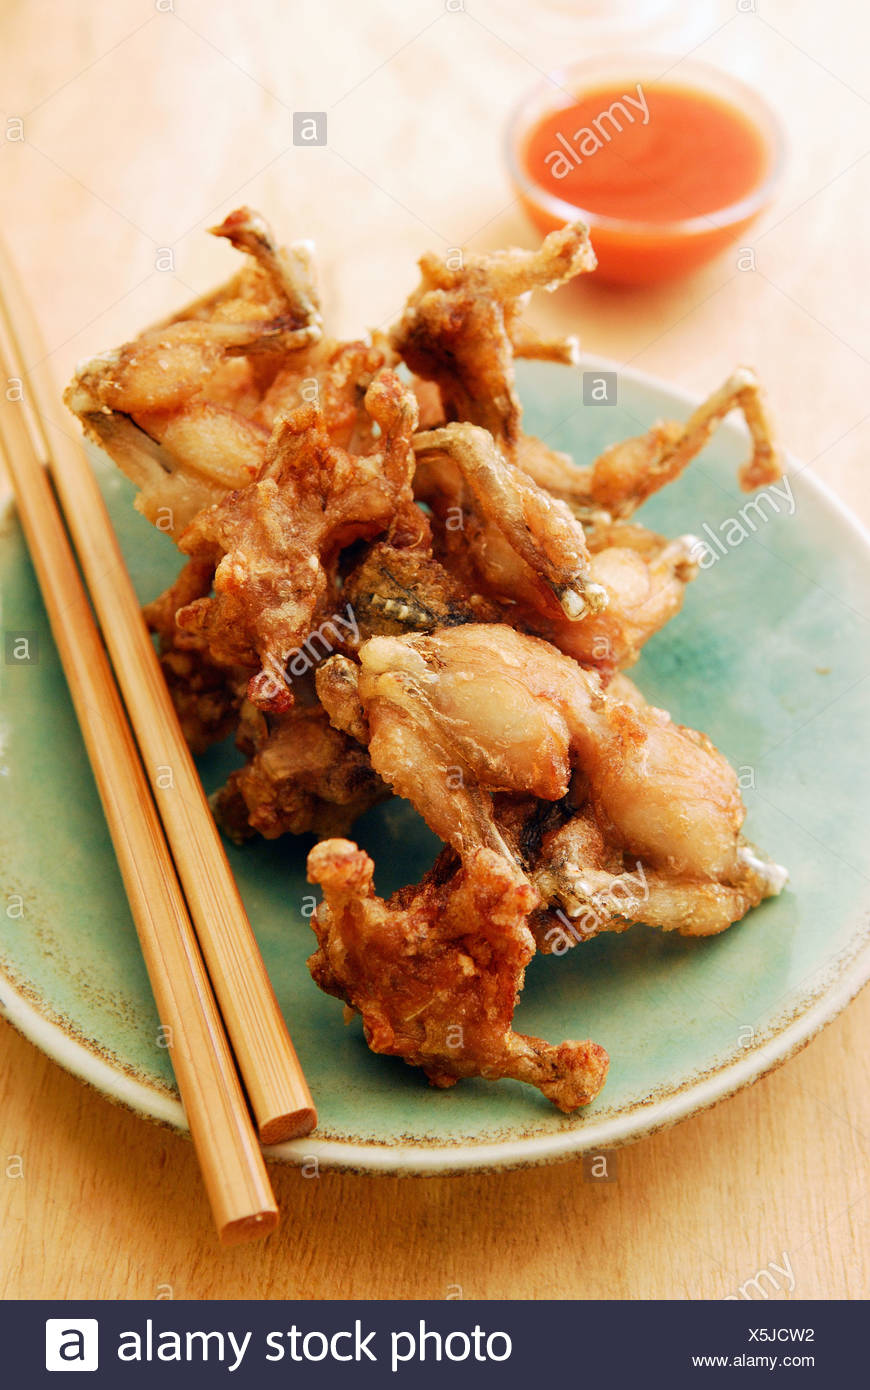 Frogs Legs Dish High Resolution Stock Photography And Images Alamy